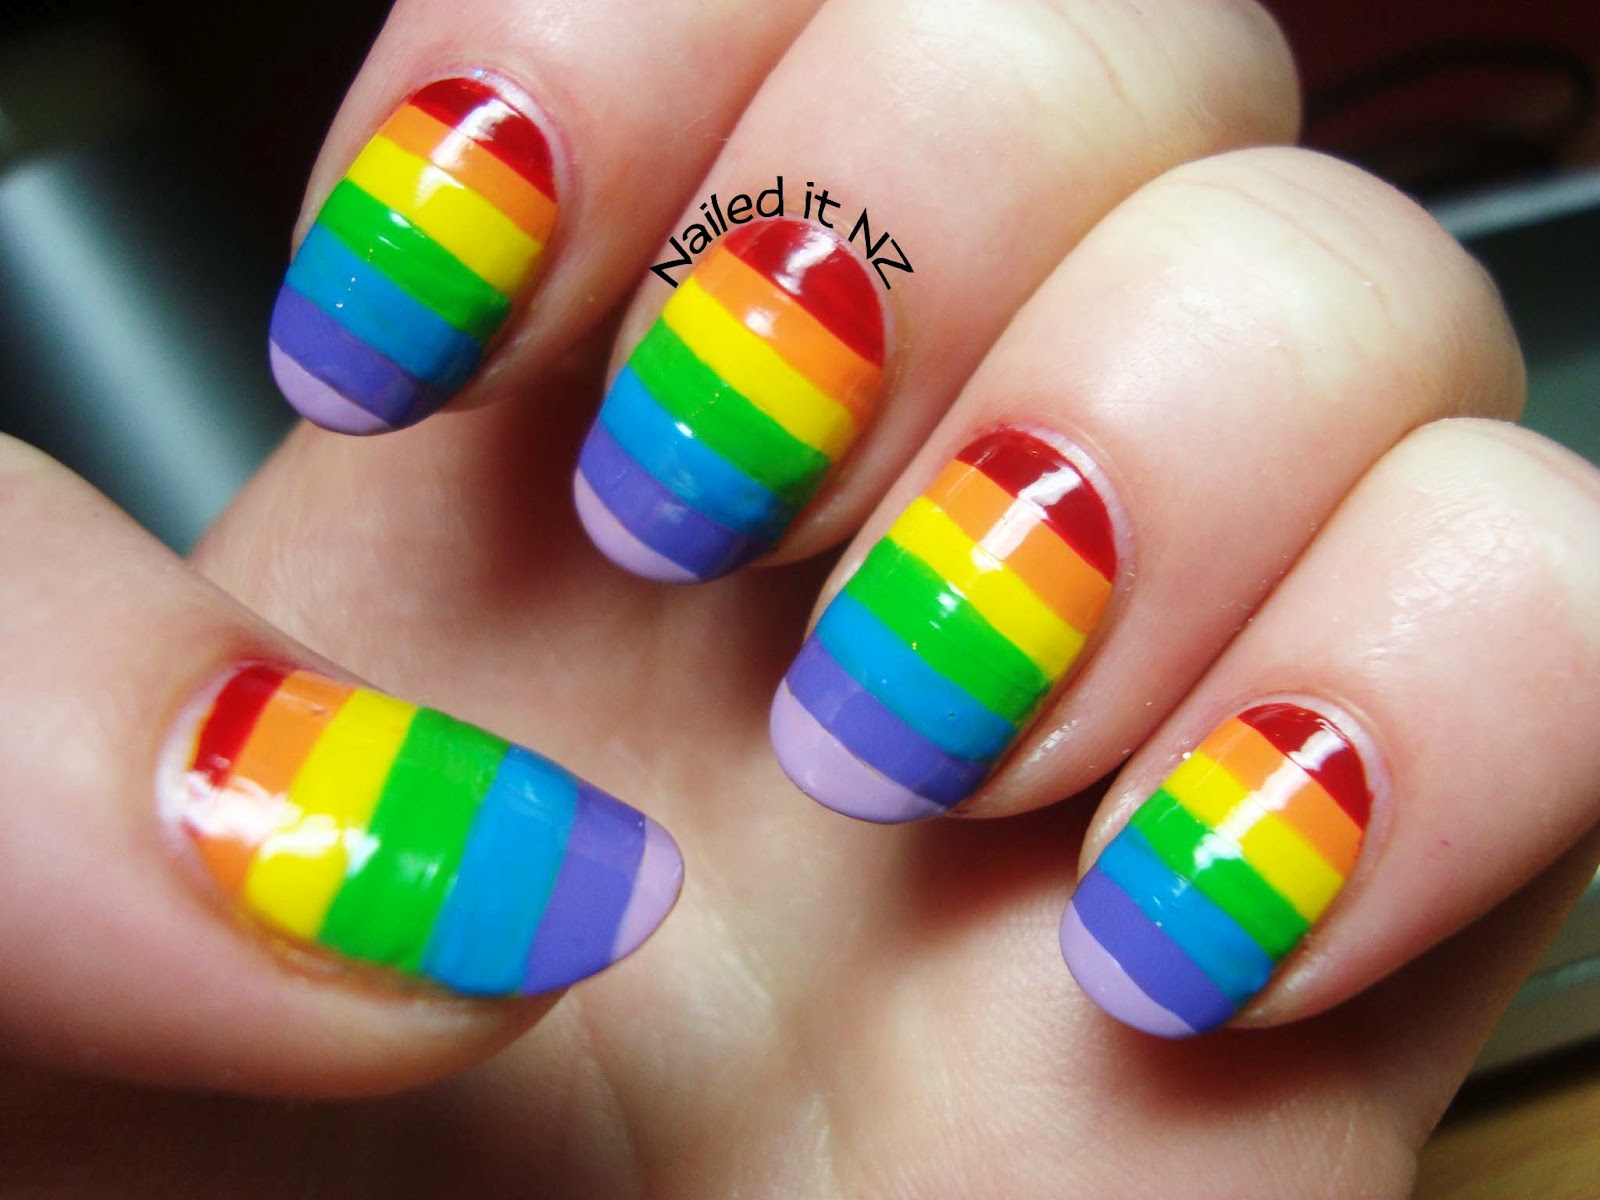 Rainbow nails and a hot pink cat!